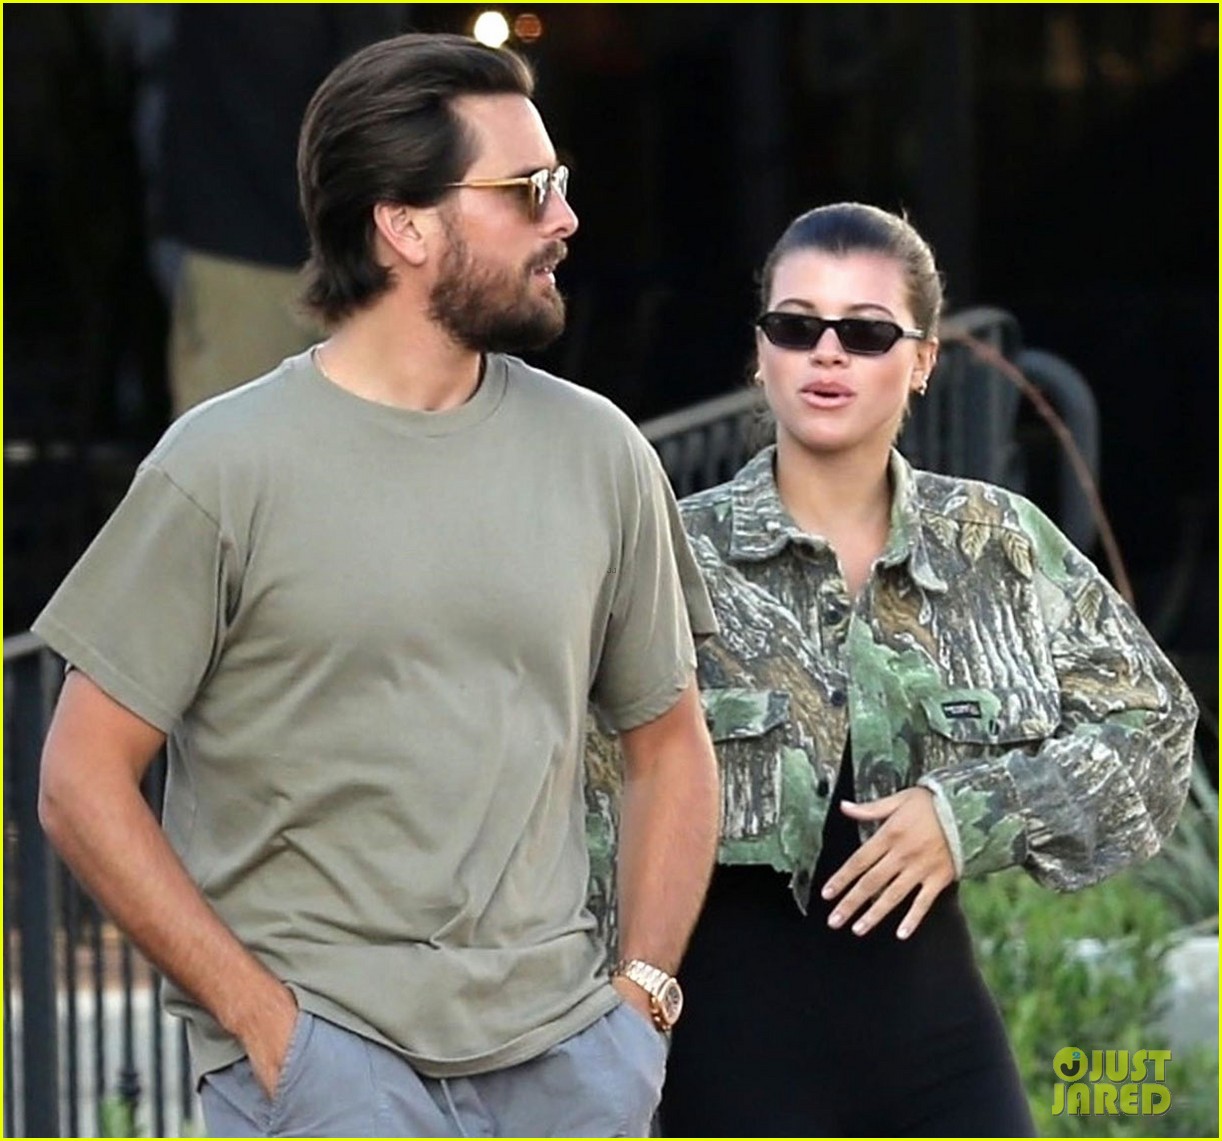 scott disick and sofia richie return from mexico grab dinner in malibu 06